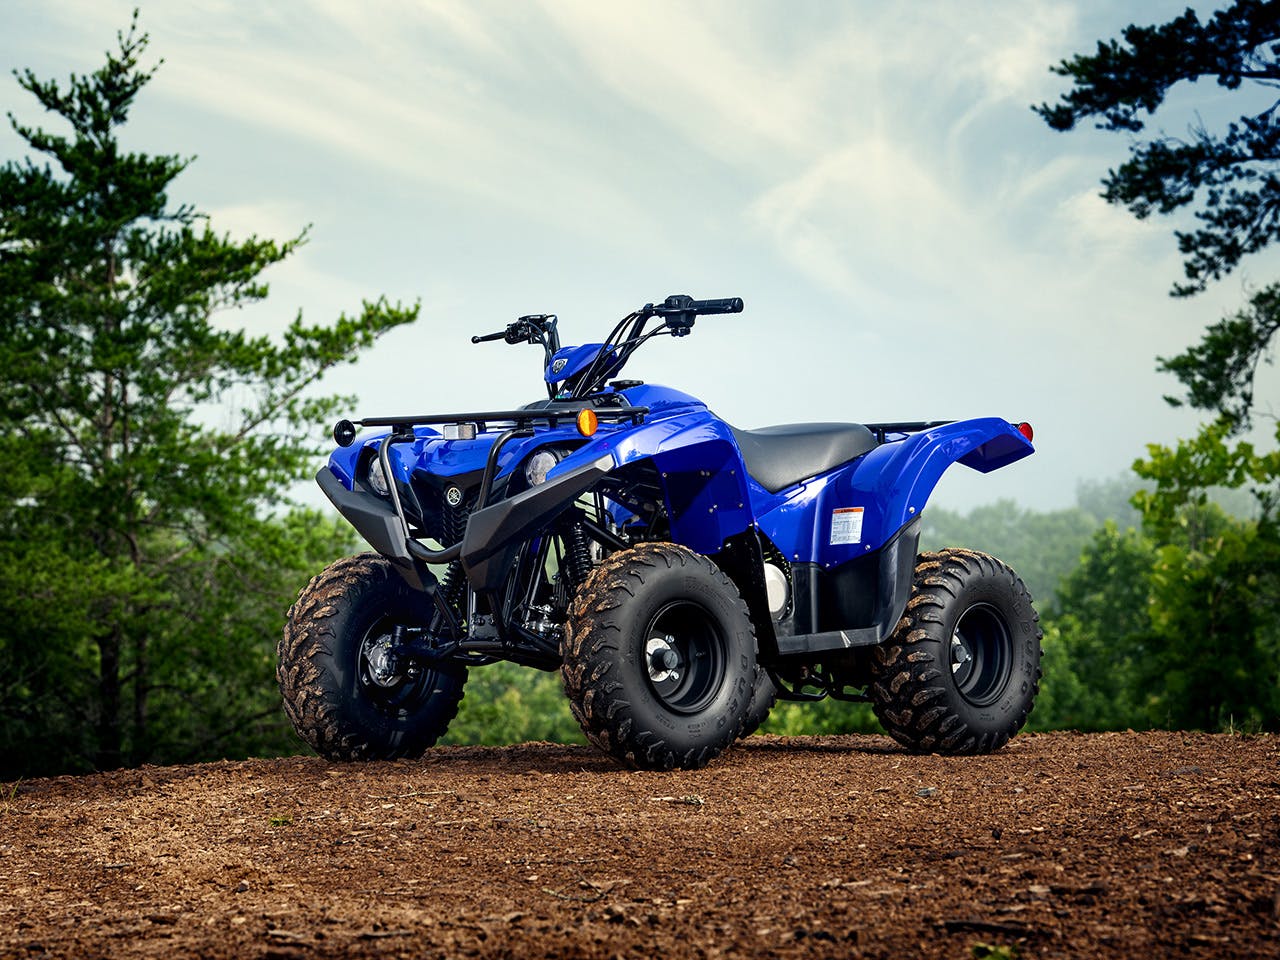 Yamaha Grizzly 90 in Steel Blue colour, being ridden off-track